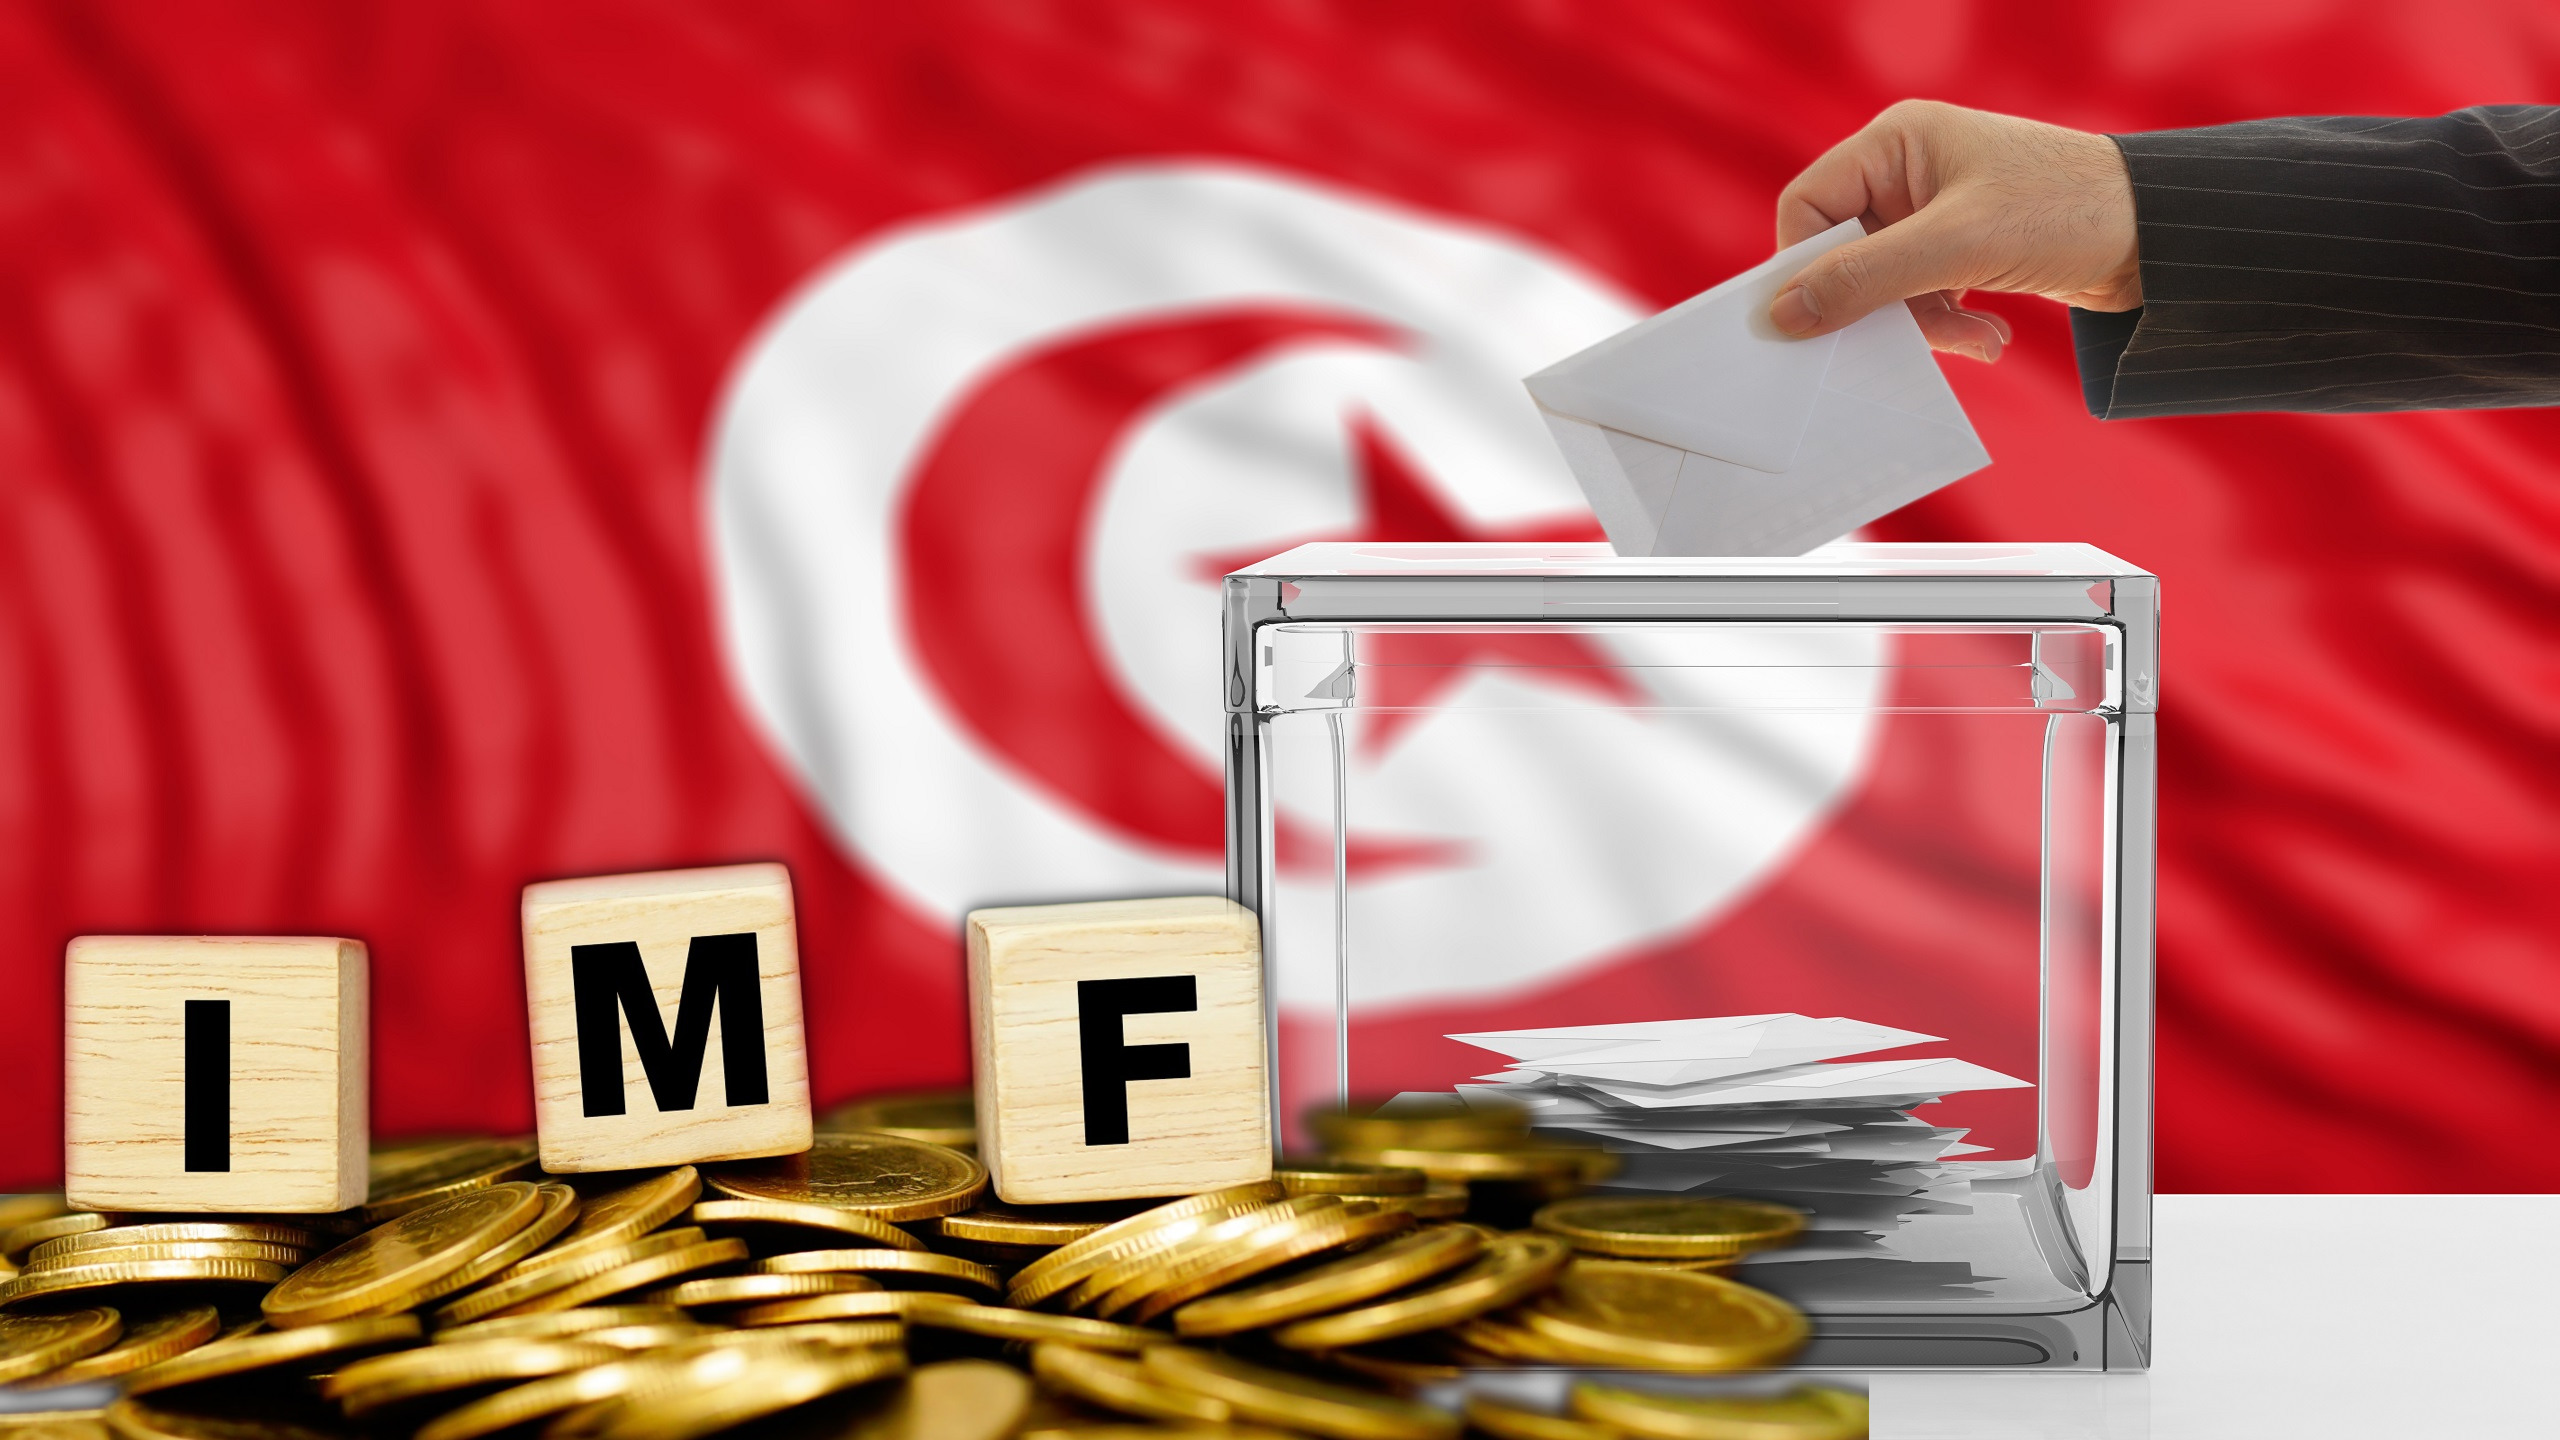 Tunisia: Despite Historic Low Turnout, Election Likely To Enable Saied To Get IMF Loan